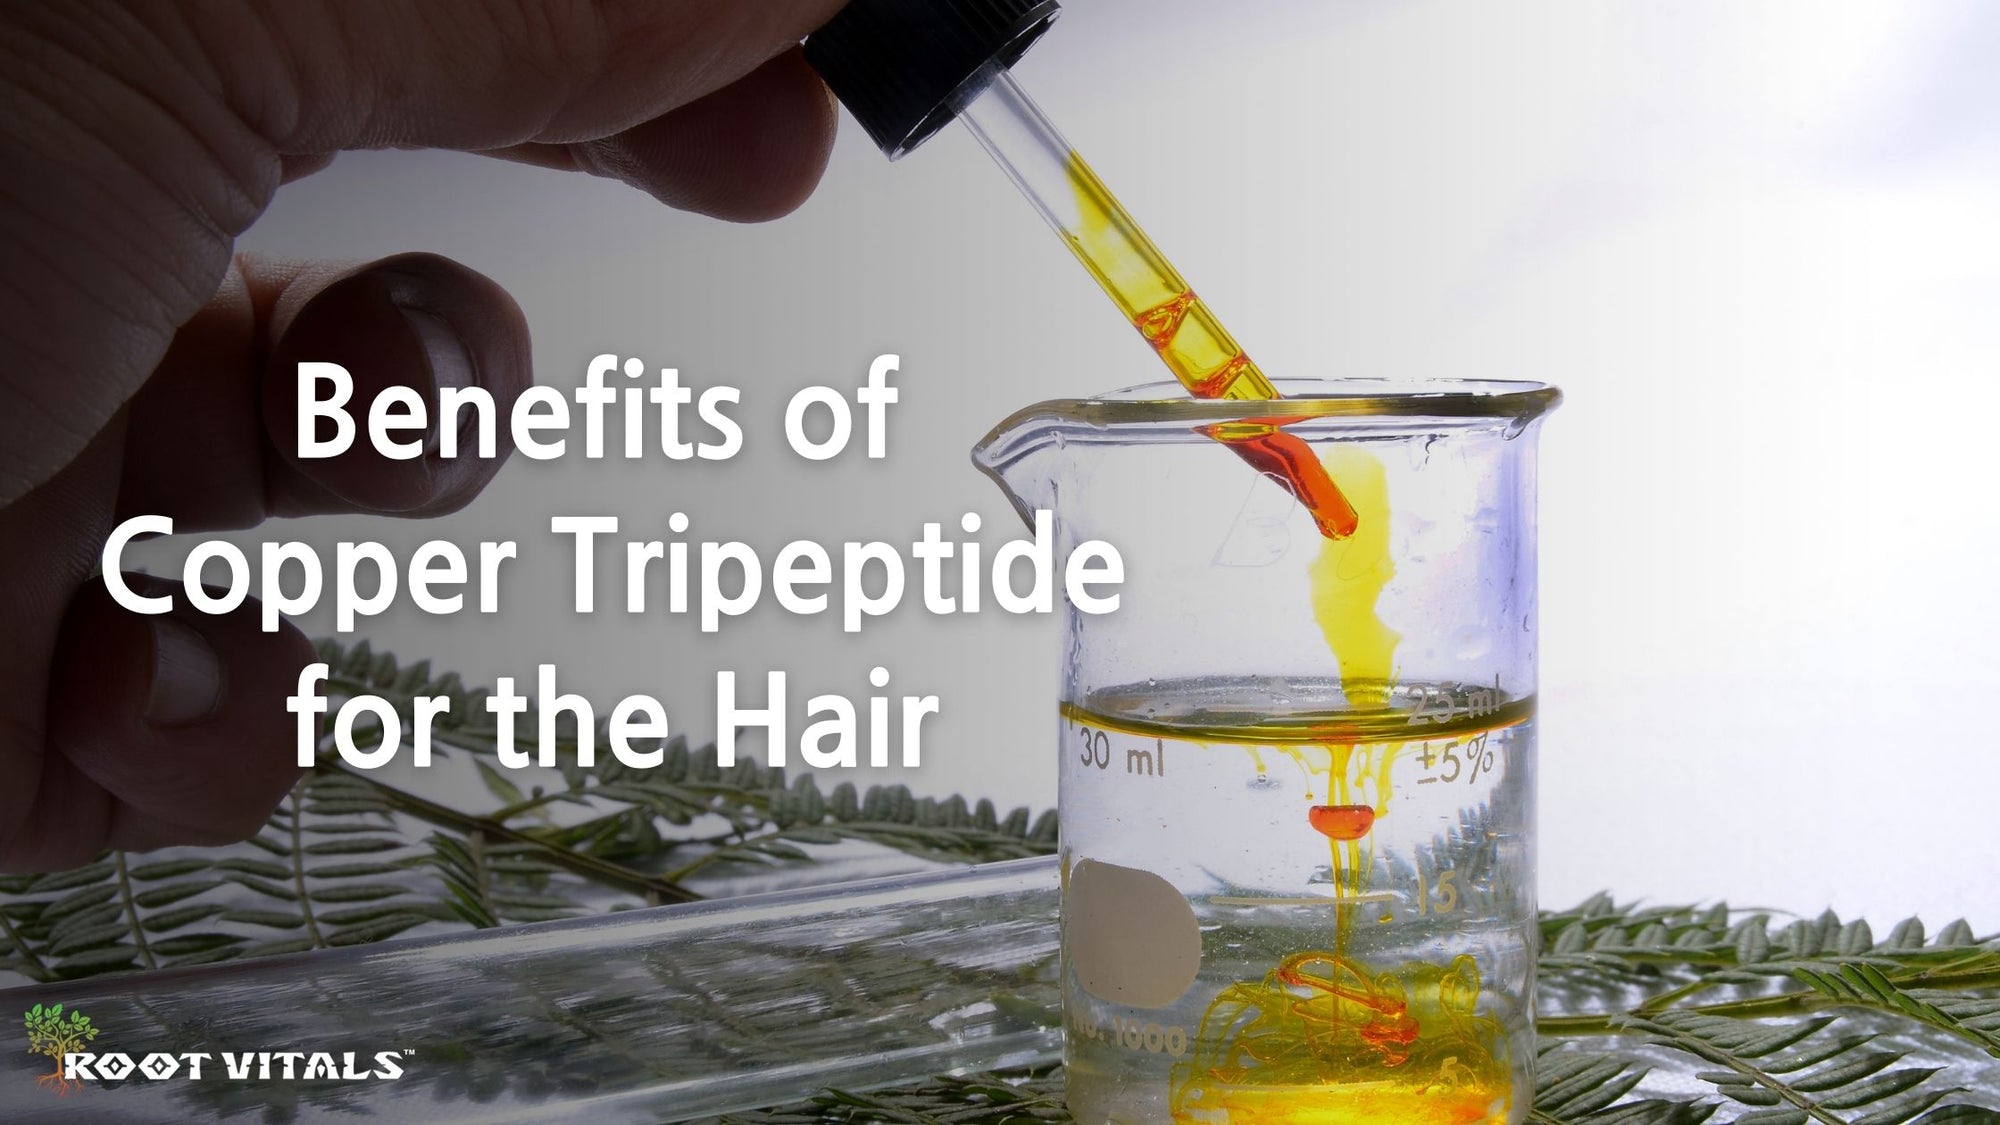 Benefits of Copper Tripeptide for the Hair